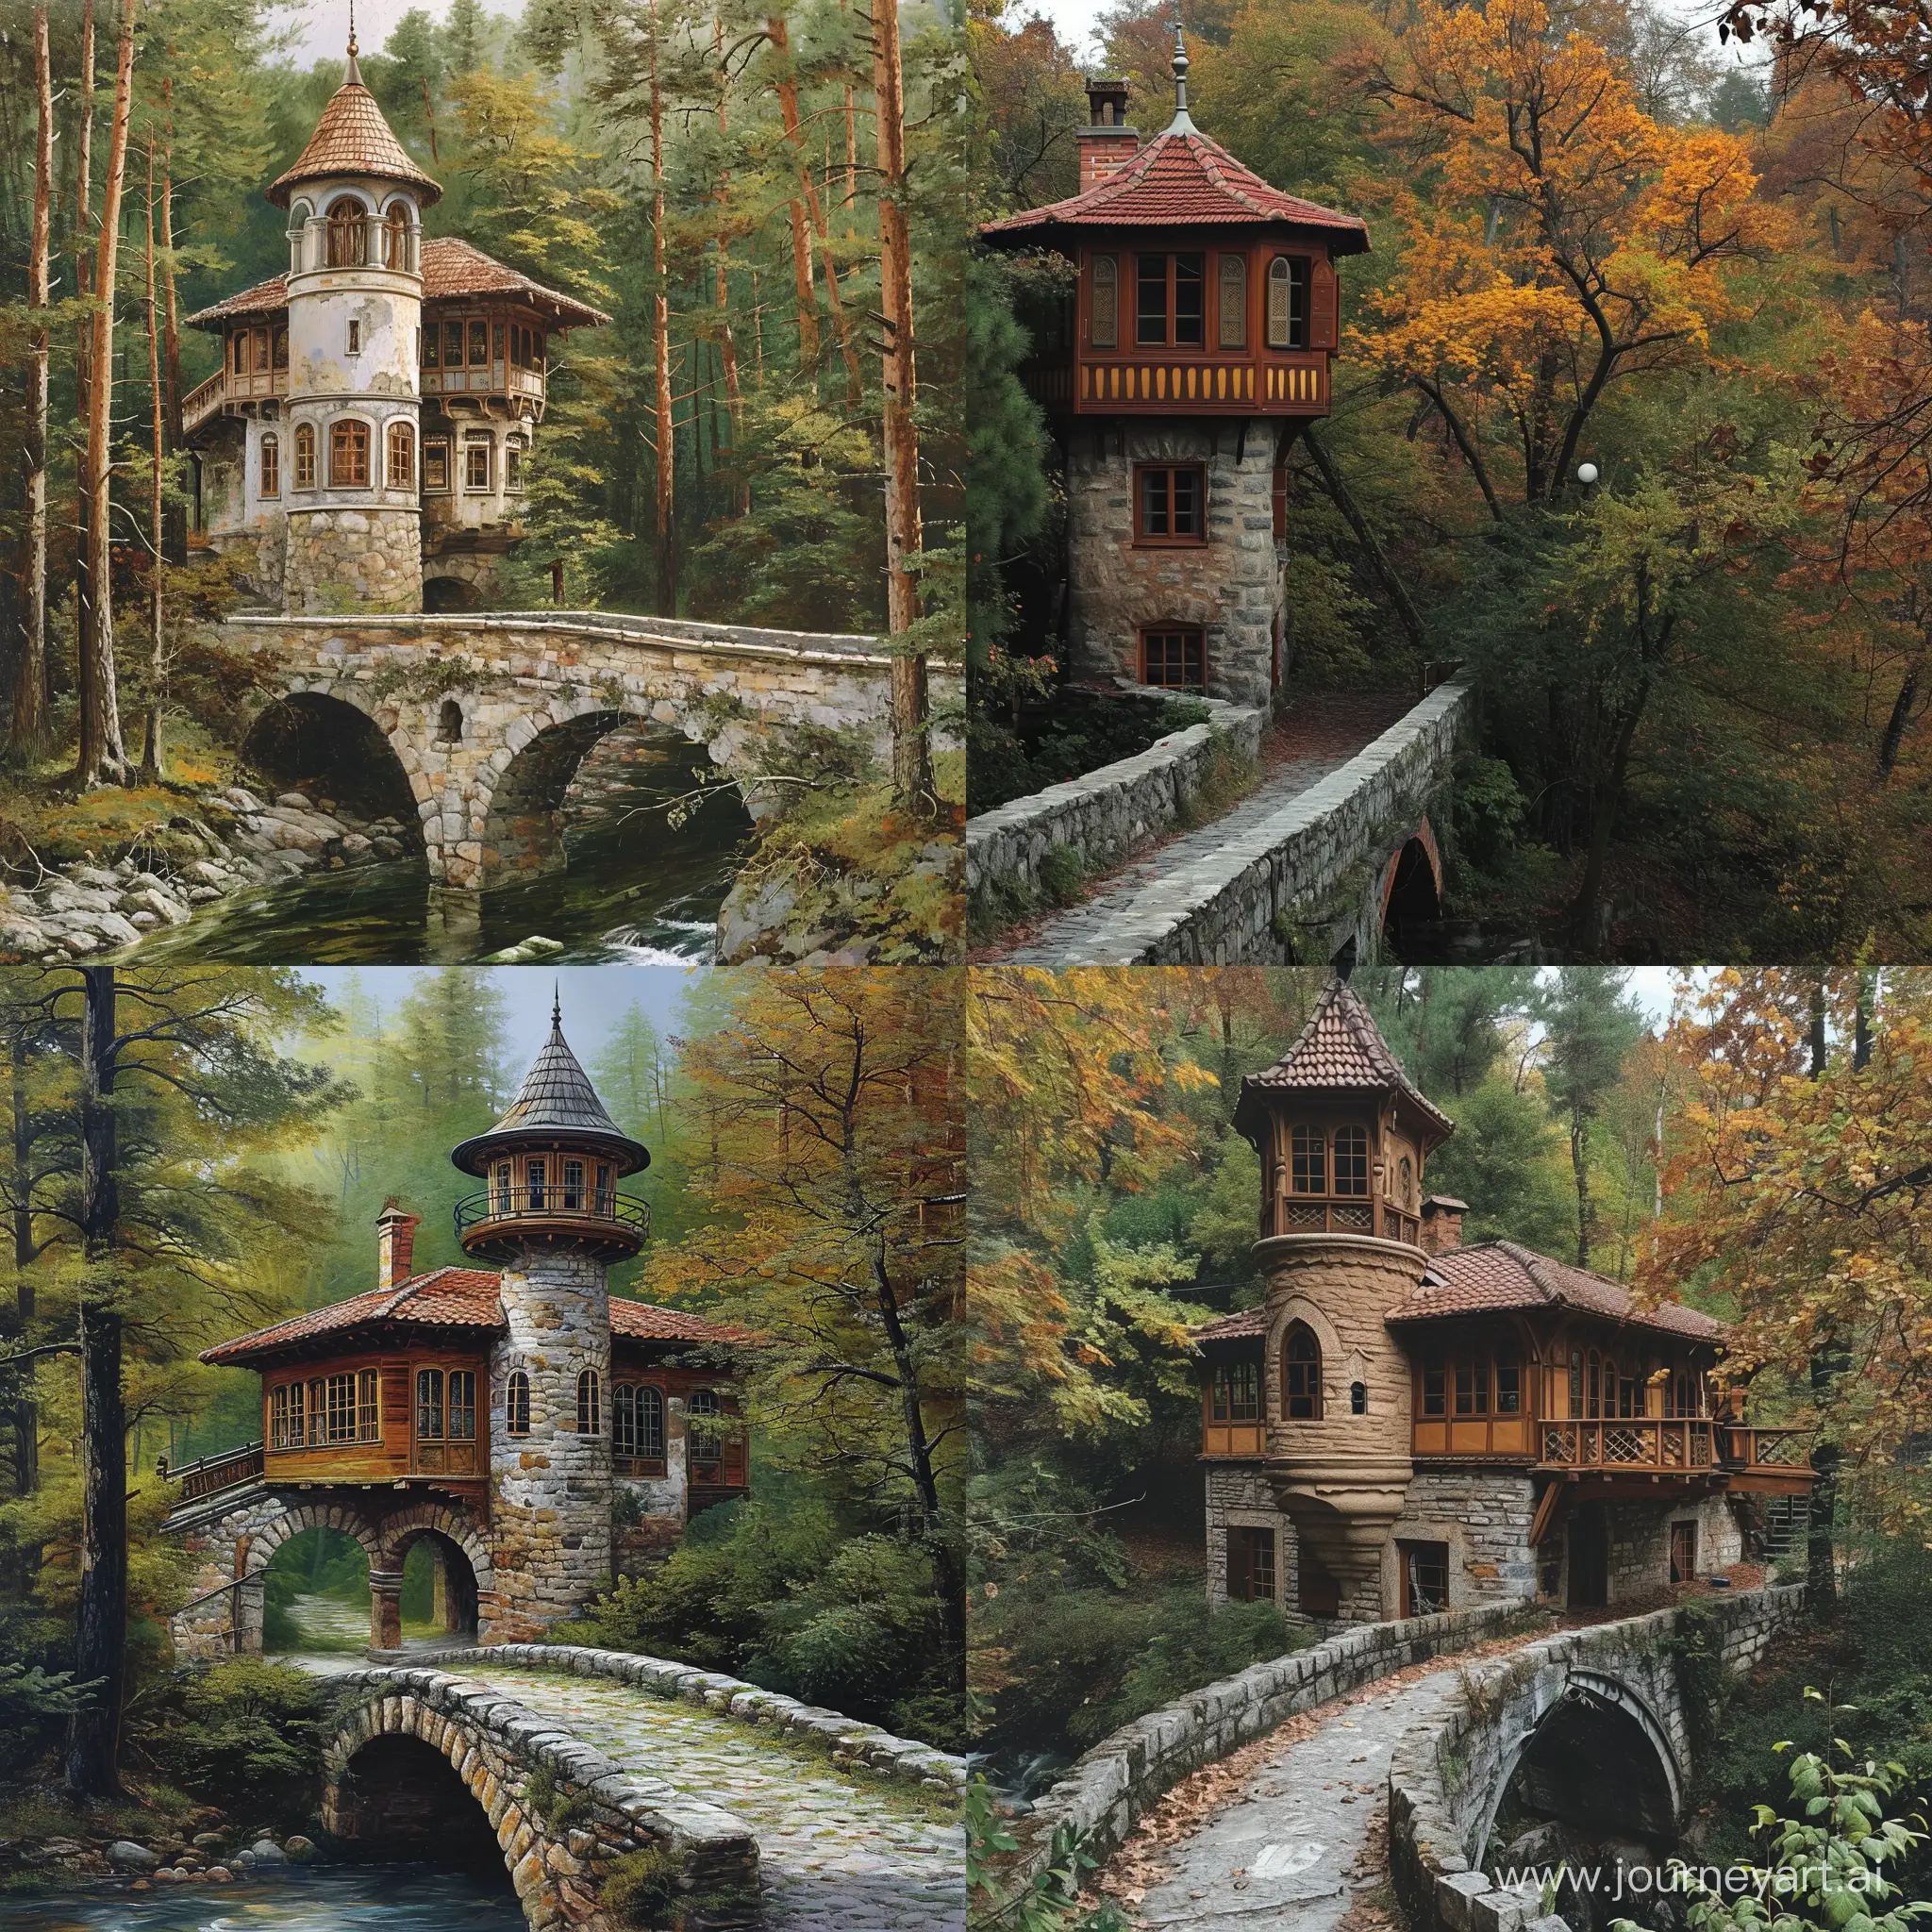 Enchanting-Turkish-Forest-House-with-Tower-on-Stone-Bridge